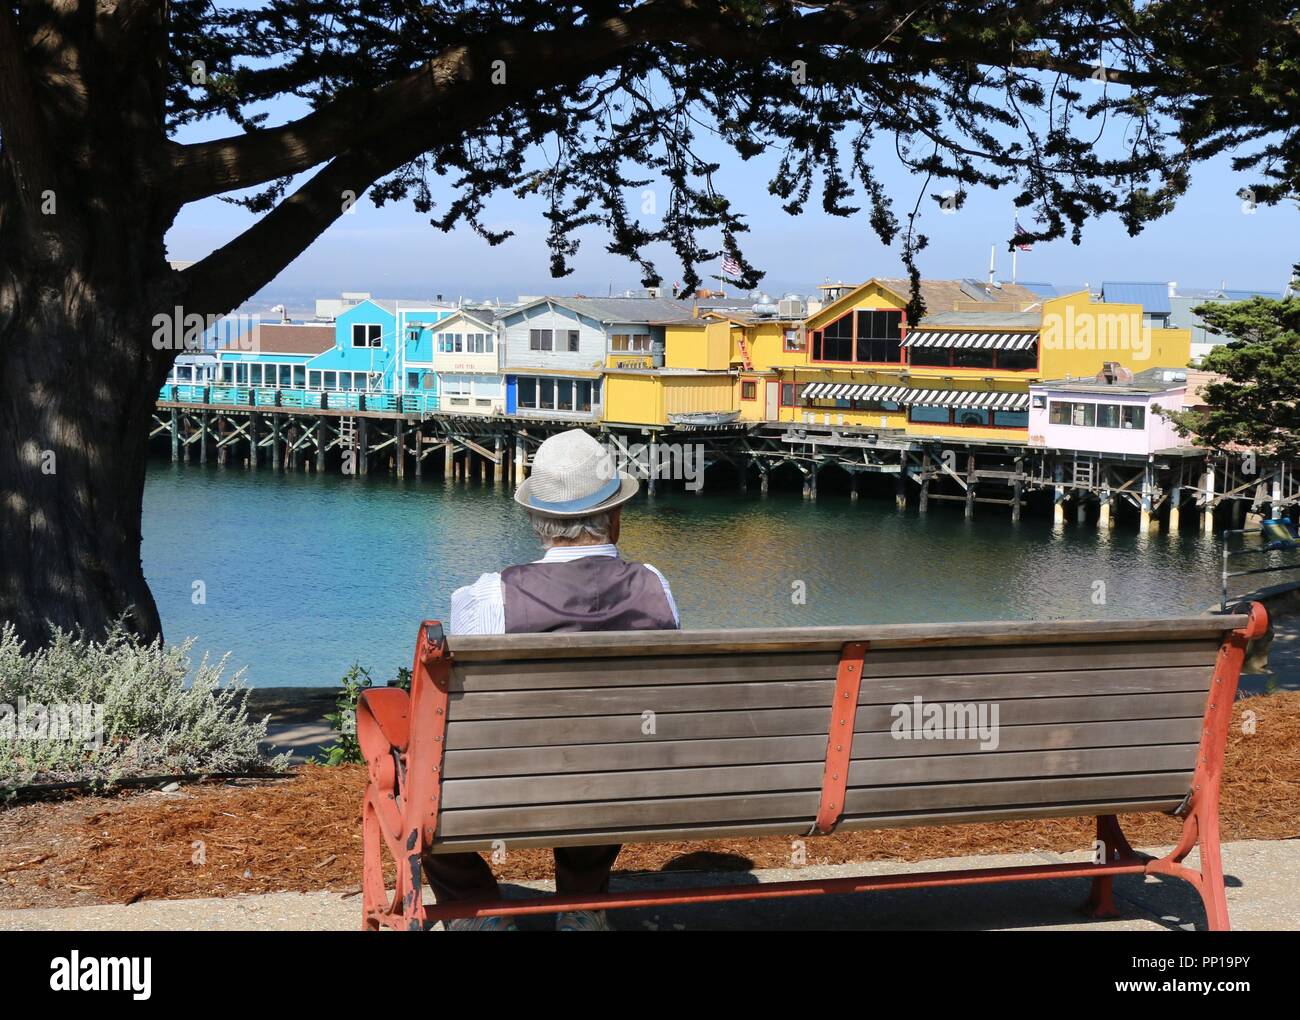 An elderly man wearing a dapper hat sits on a bench enjoying the view of Fisherman's Wharf, Monterey, CA. Stock Photo